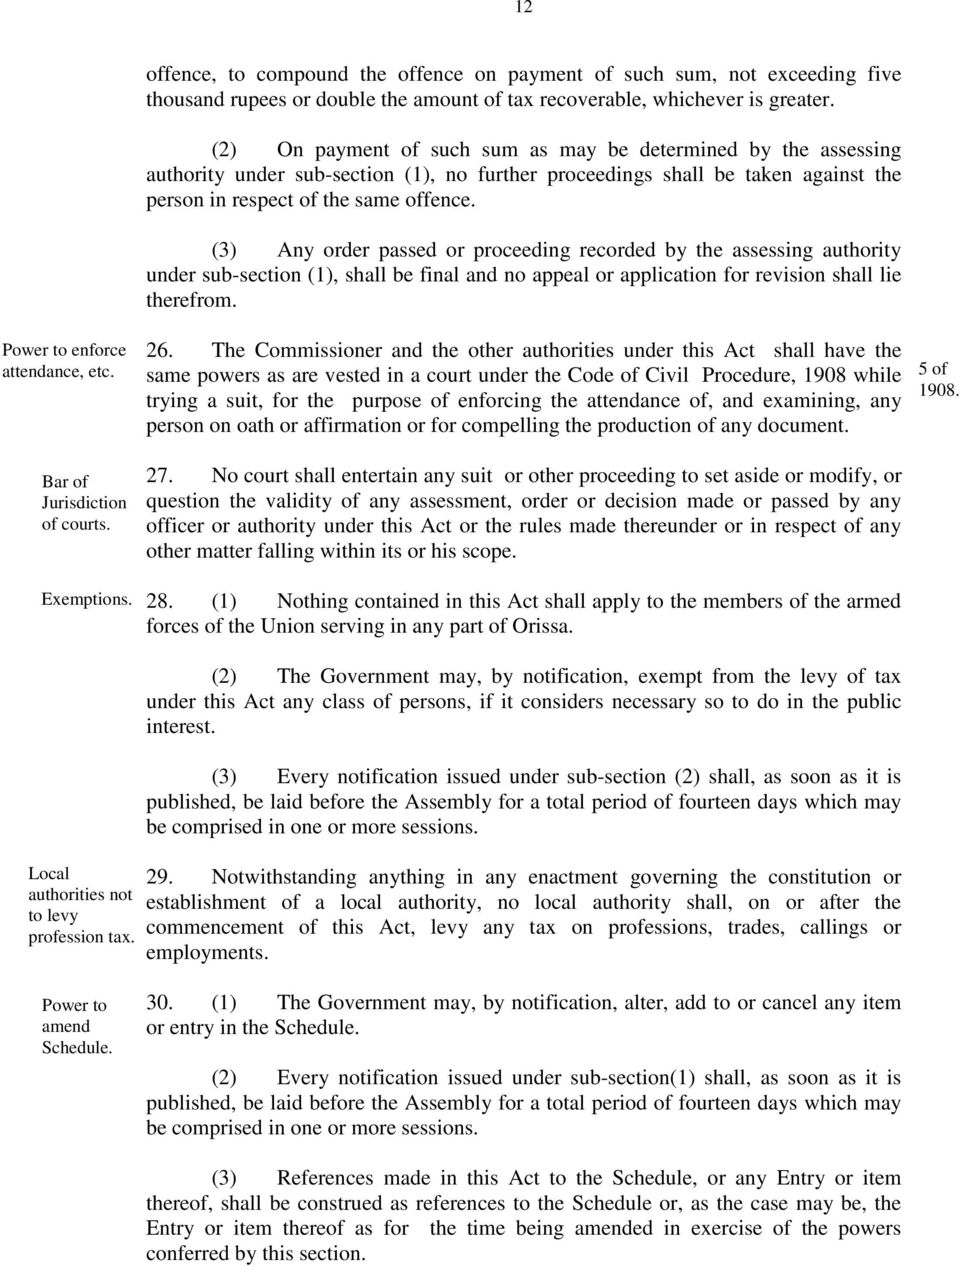 (2) On payment of such sum as may be determined by the assessing authority under sub-section (1), no further proceedings shall be taken against the person in respect of the same offence.